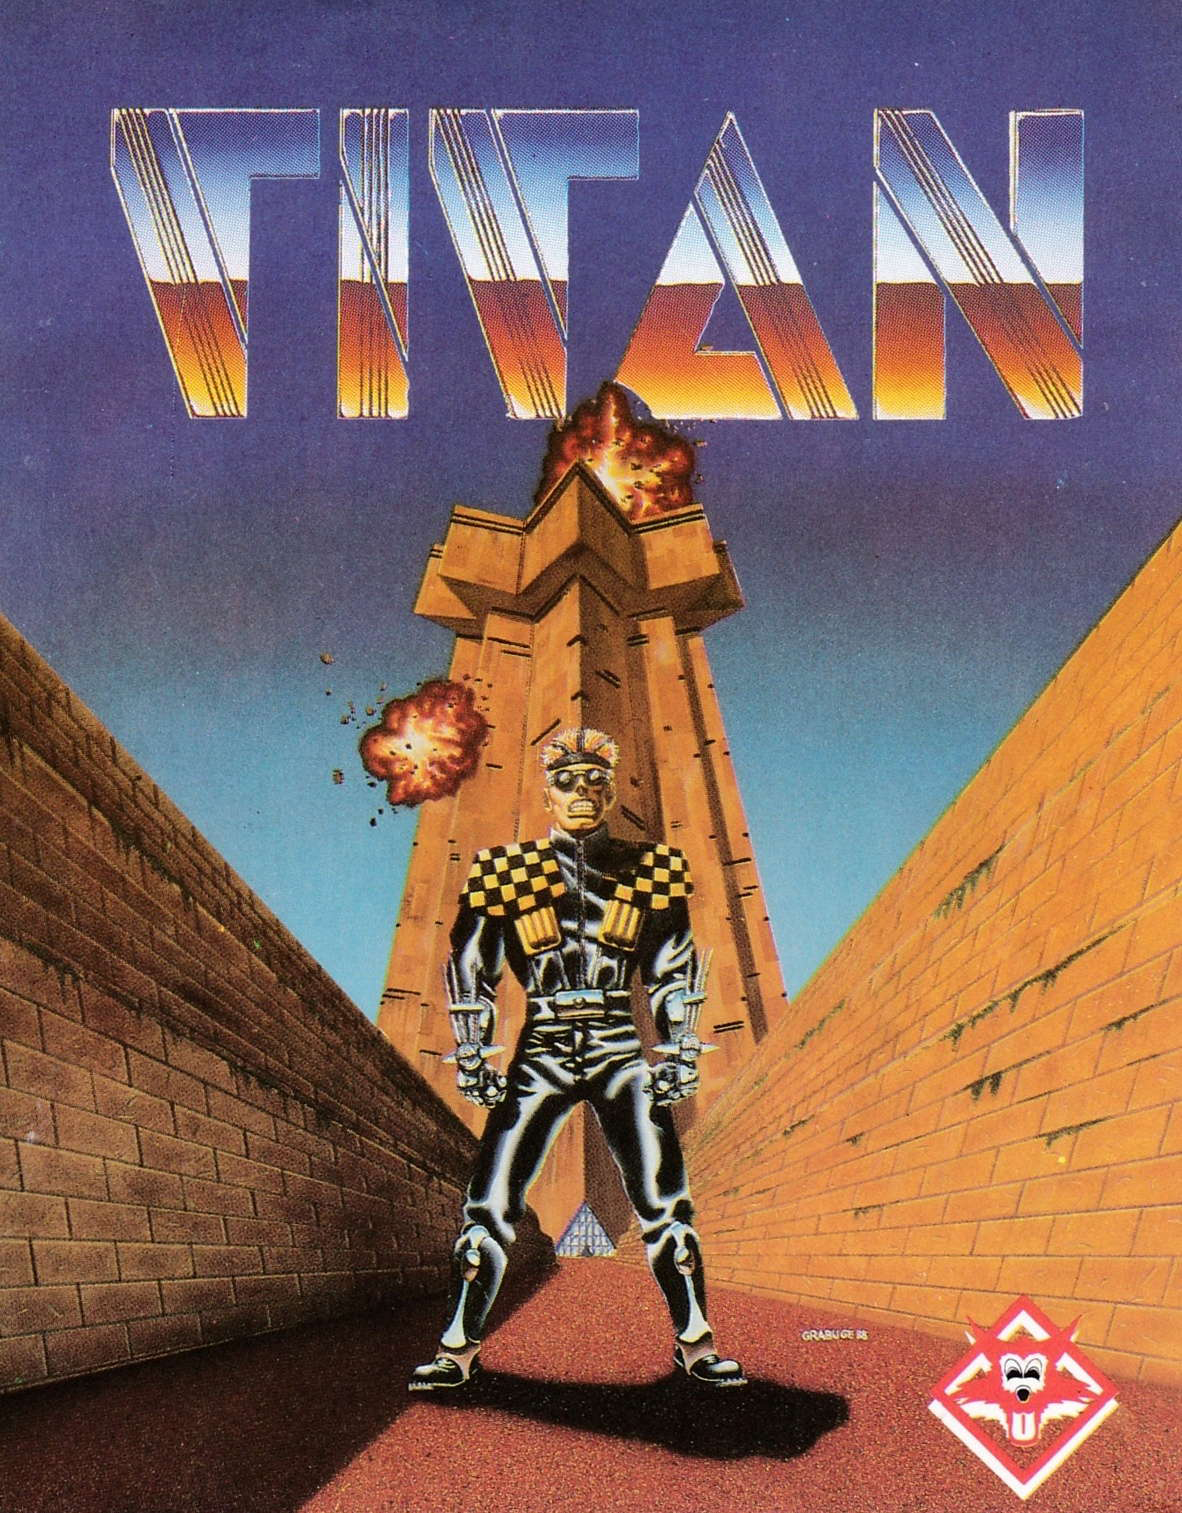 screenshot of the Amstrad CPC game Titan by GameBase CPC